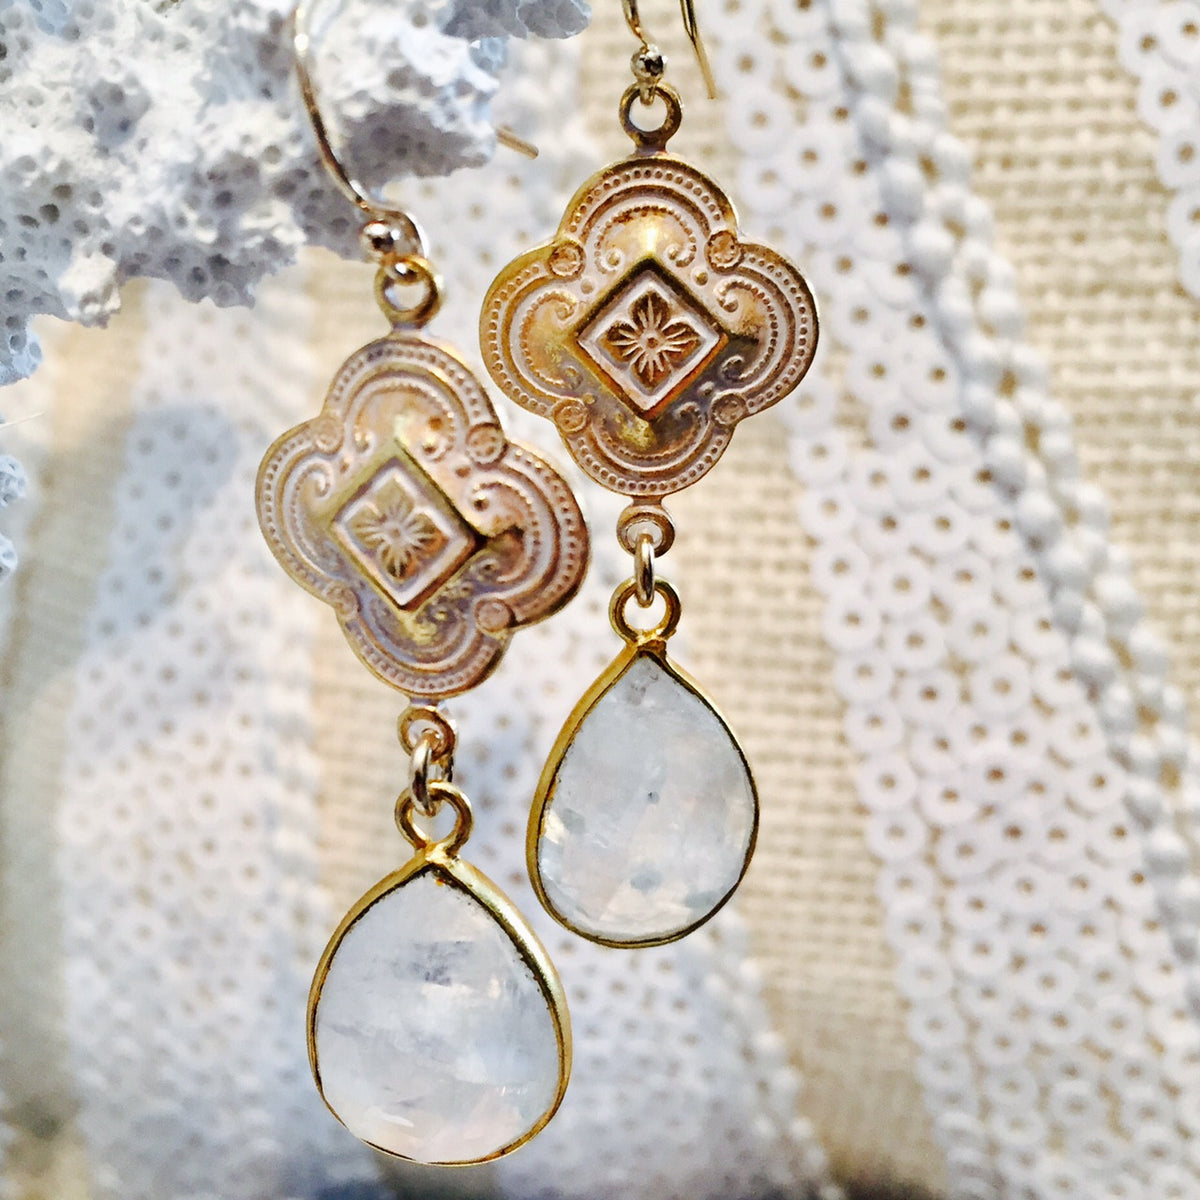 Moonstone "The Lovers Stone" Earrings Perfect For Valentine's Day